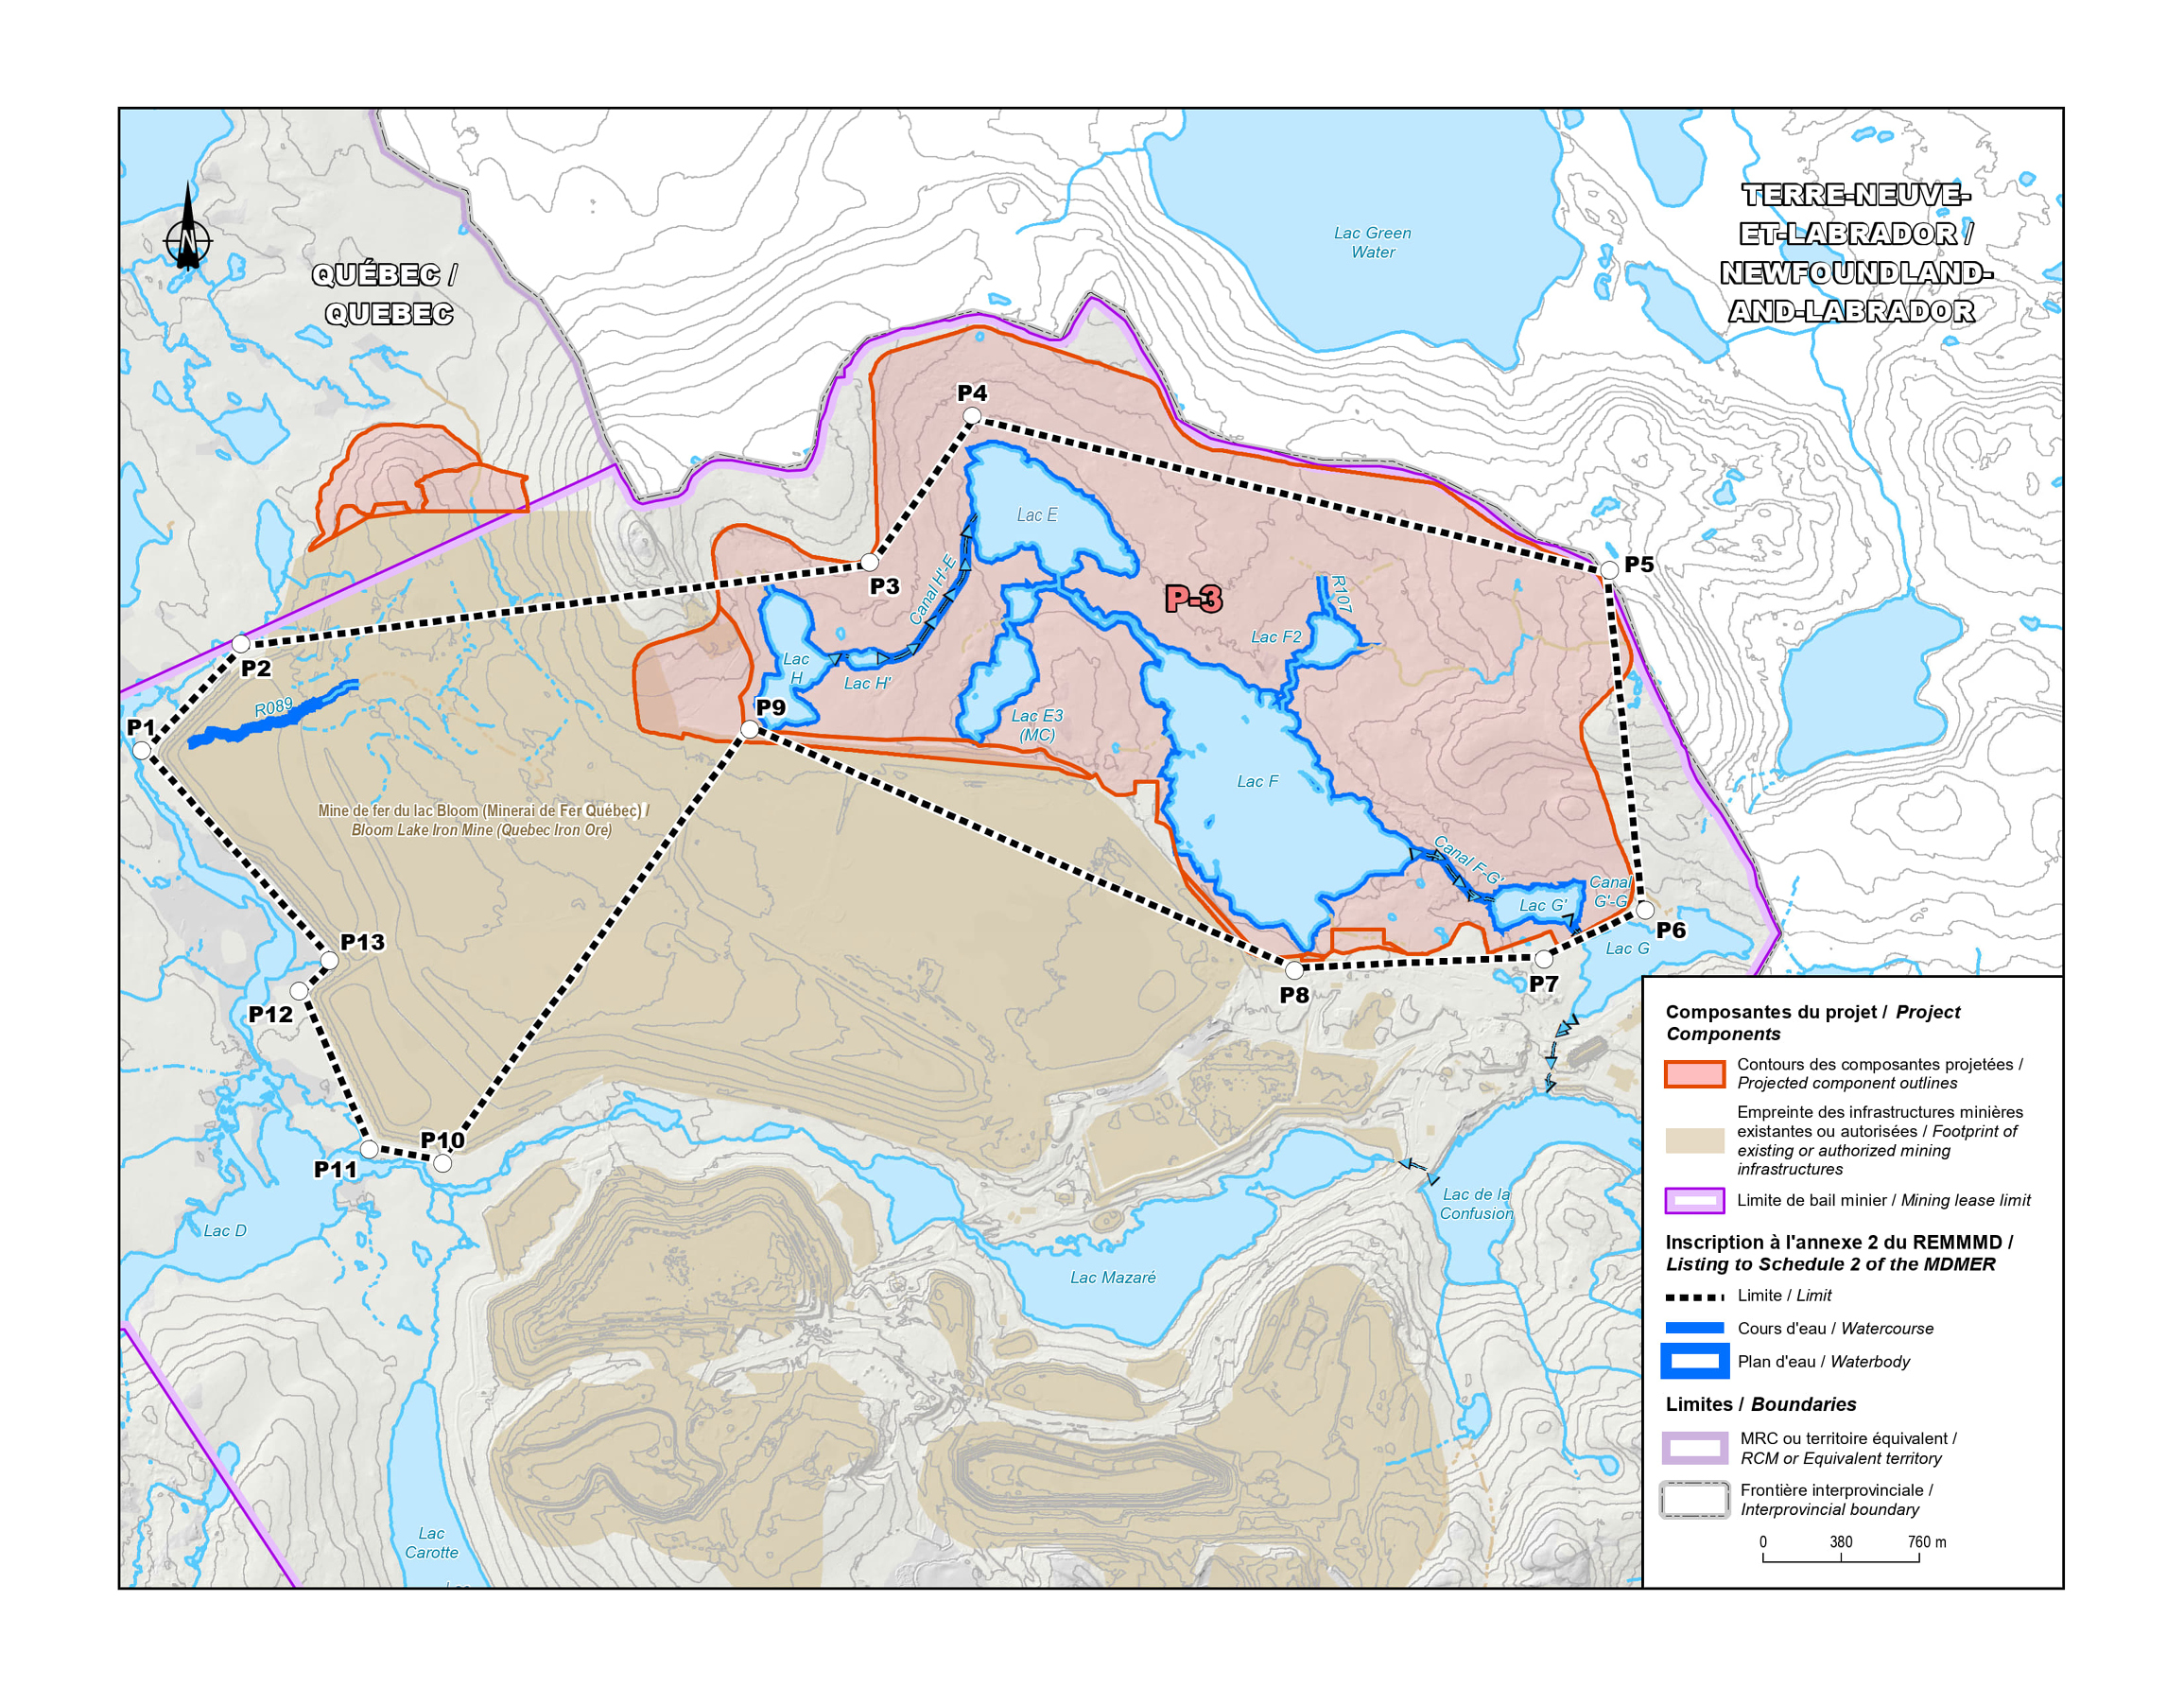 Figure 2: Geographical area to be listed in Schedule 2 of the MDMER for the tailings storage area – Text version below the image